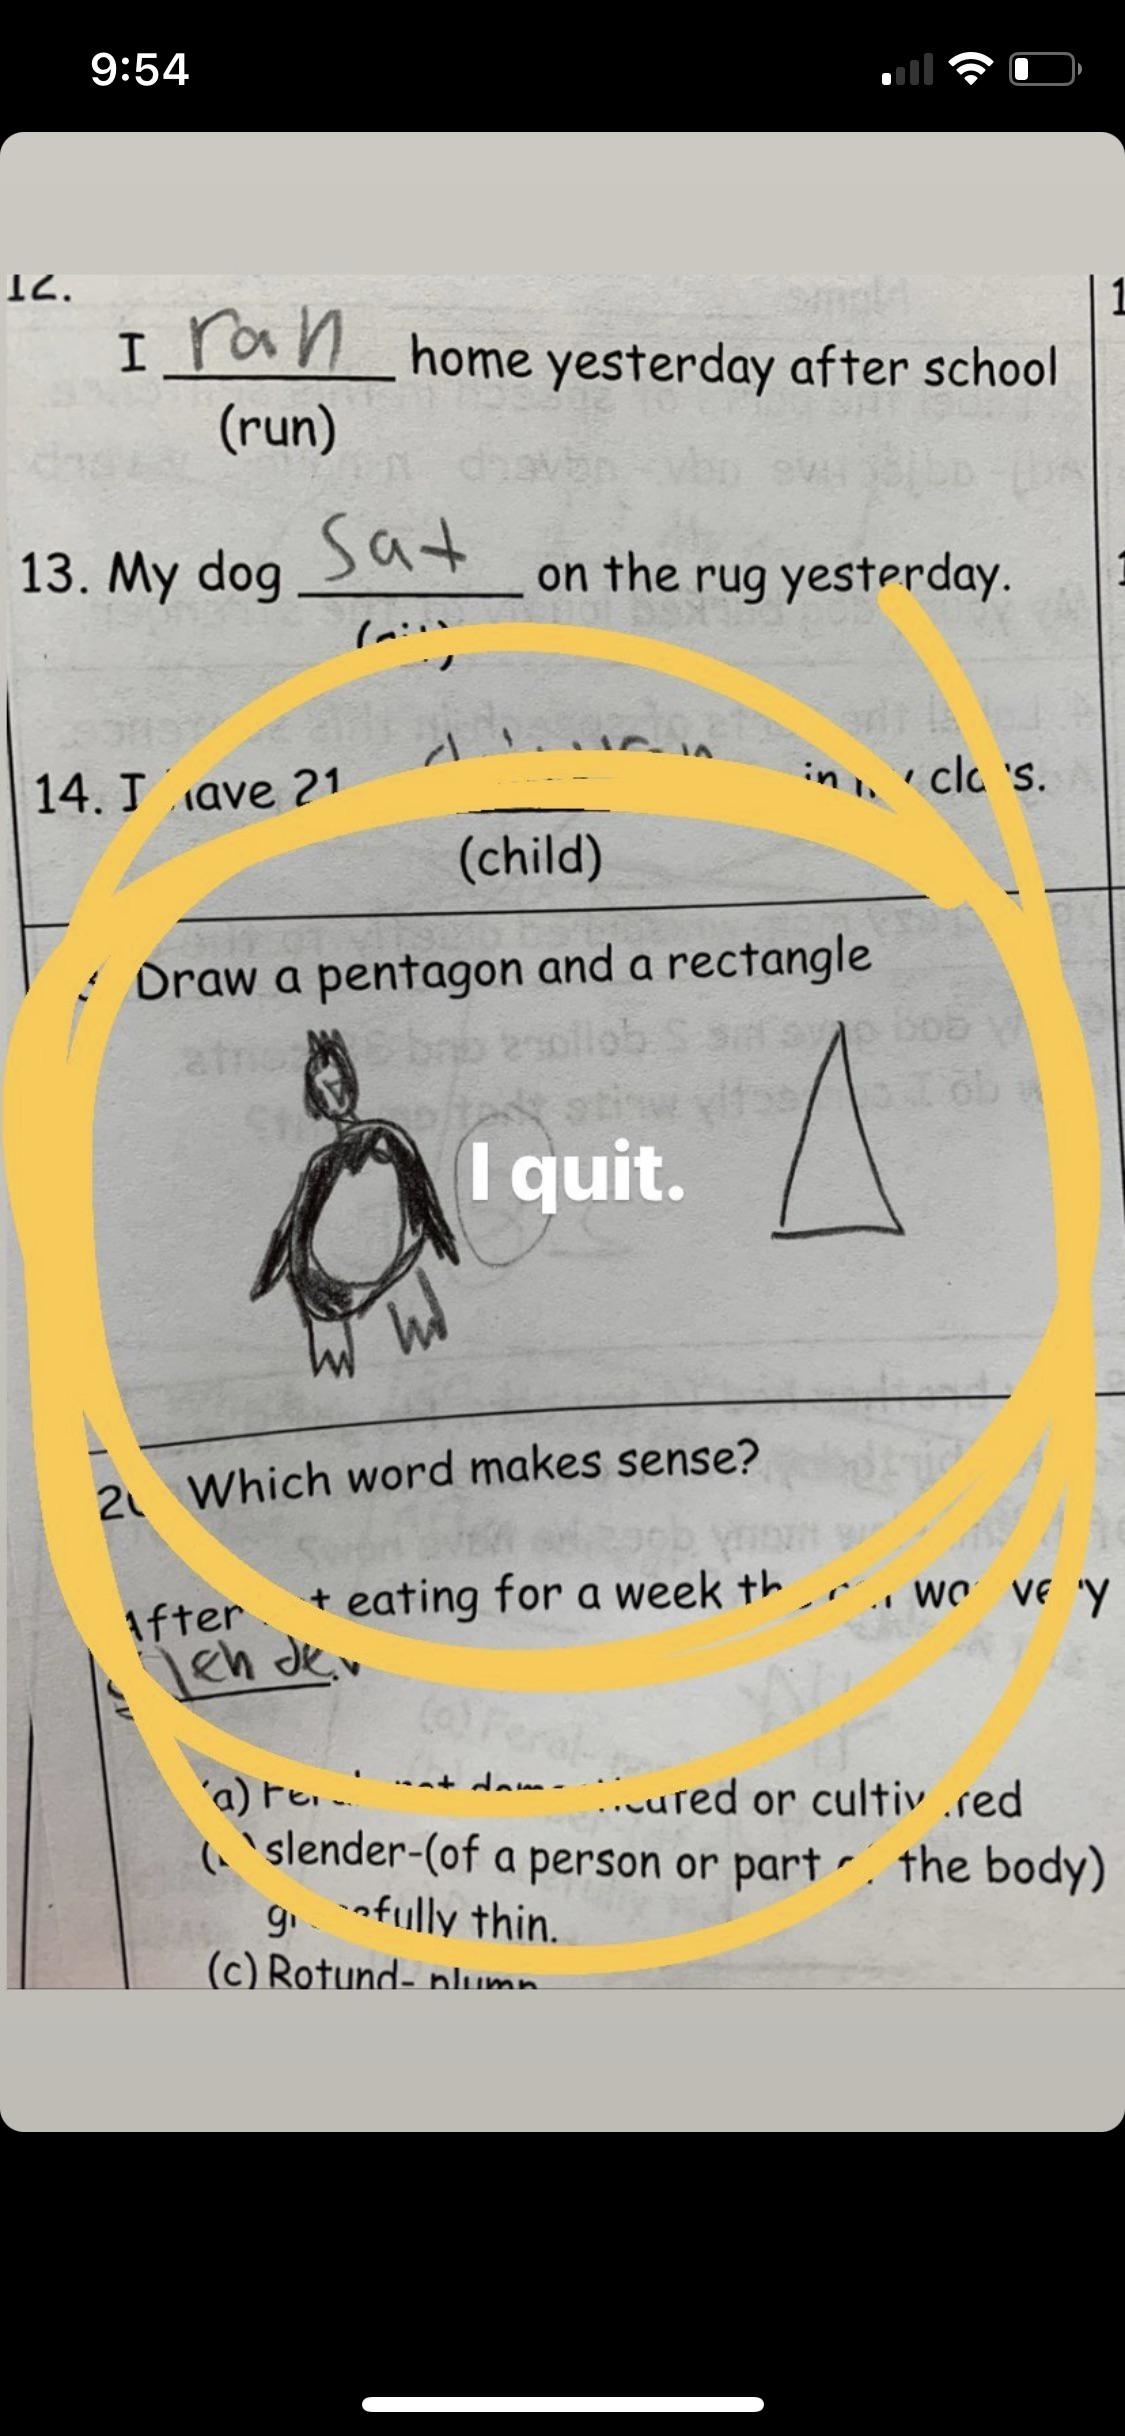 Student draws a figure that looks vaguely like a penguin and a triangle in response to the prompt, &quot;Draw a pentagon and a rectangle&quot;